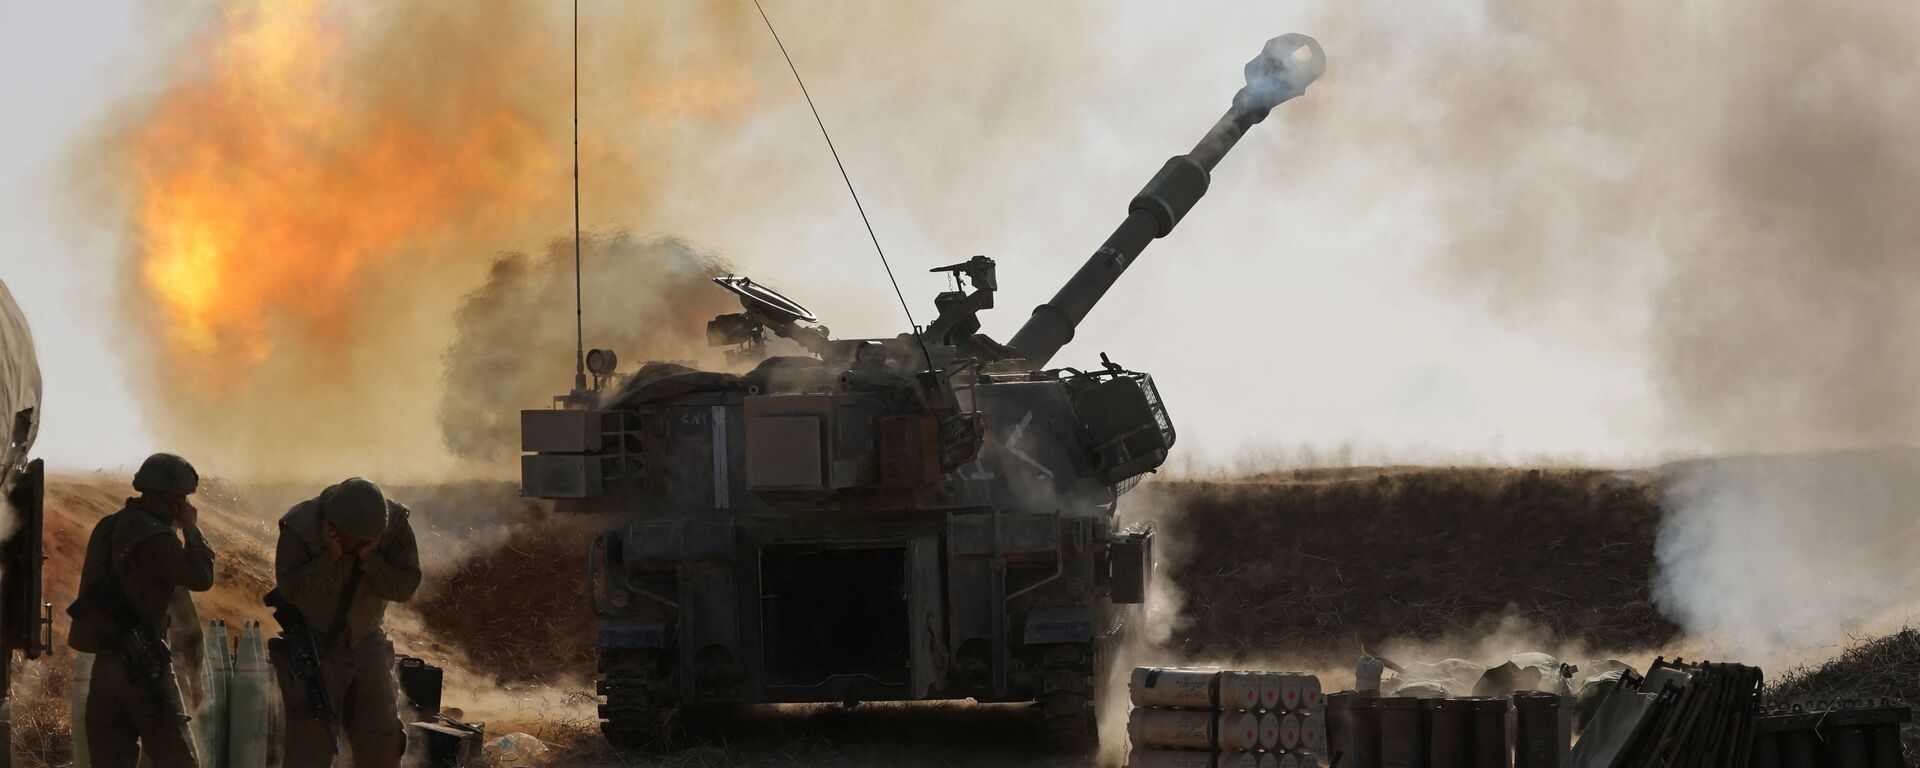 Israeli soldiers fire a 155mm self-propelled howitzer towards targets in the Gaza Strip from their position near the southern Israeli city of Sderot on May 12, 2021. - Israel's Defence Minister Benny Gantz vowed more attacks on Hamas and other Palestinian militant groups in Gaza to bring total, long-term quiet before considering a ceasefire. - Sputnik International, 1920